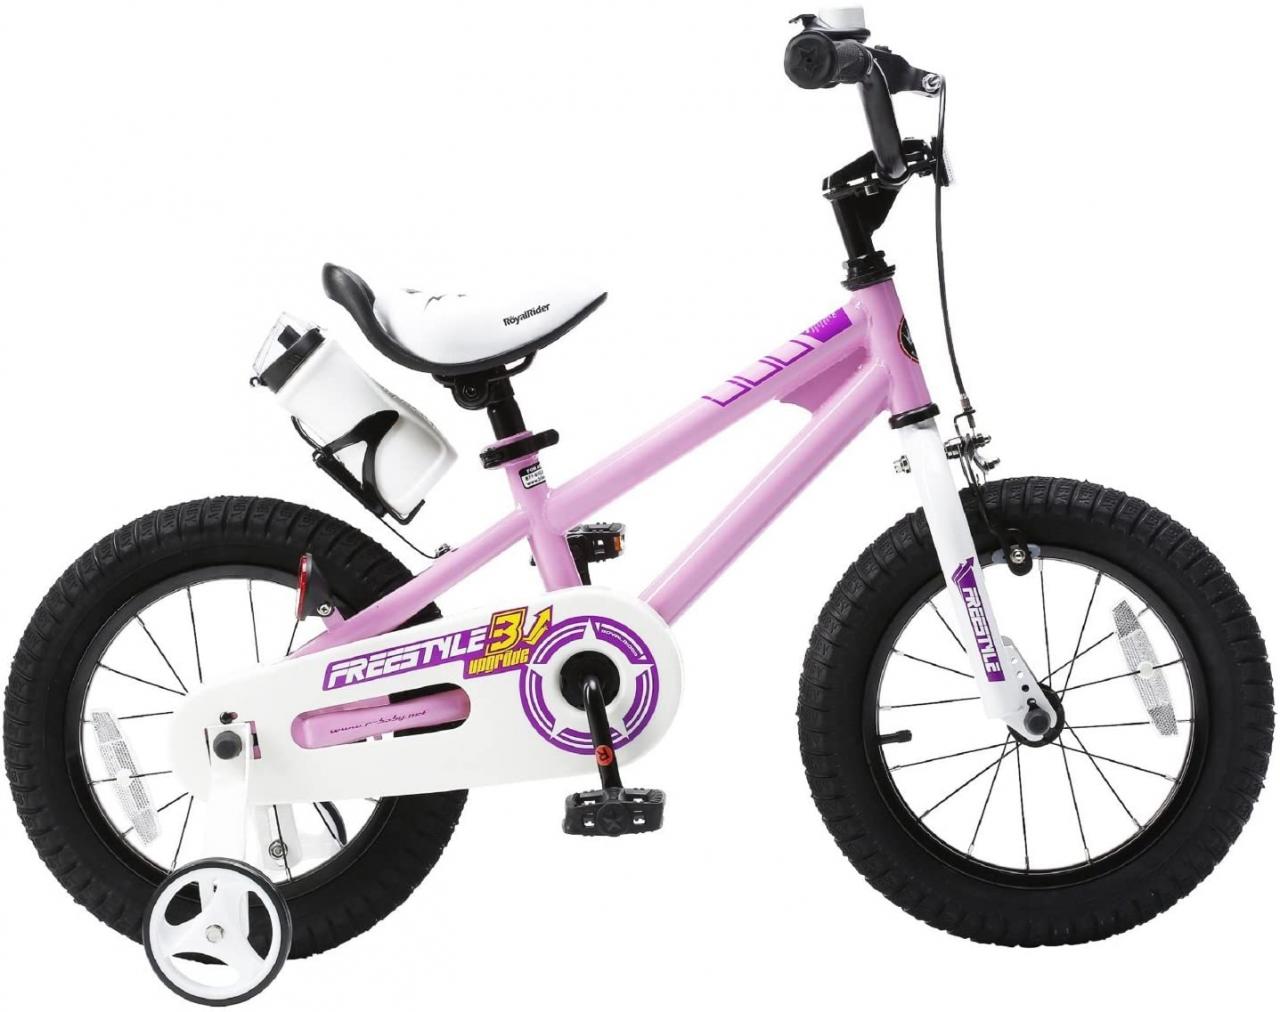 Buy RoyalBaby Kids Bike Boys Girls Freestyle Bicycle 12 14 16 Inch with  Training Wheels, 16 18 20 with Kickstand Child's Bike, Blue Red White Pink  Green Orange Online in Hong Kong. B01GQ05PUW